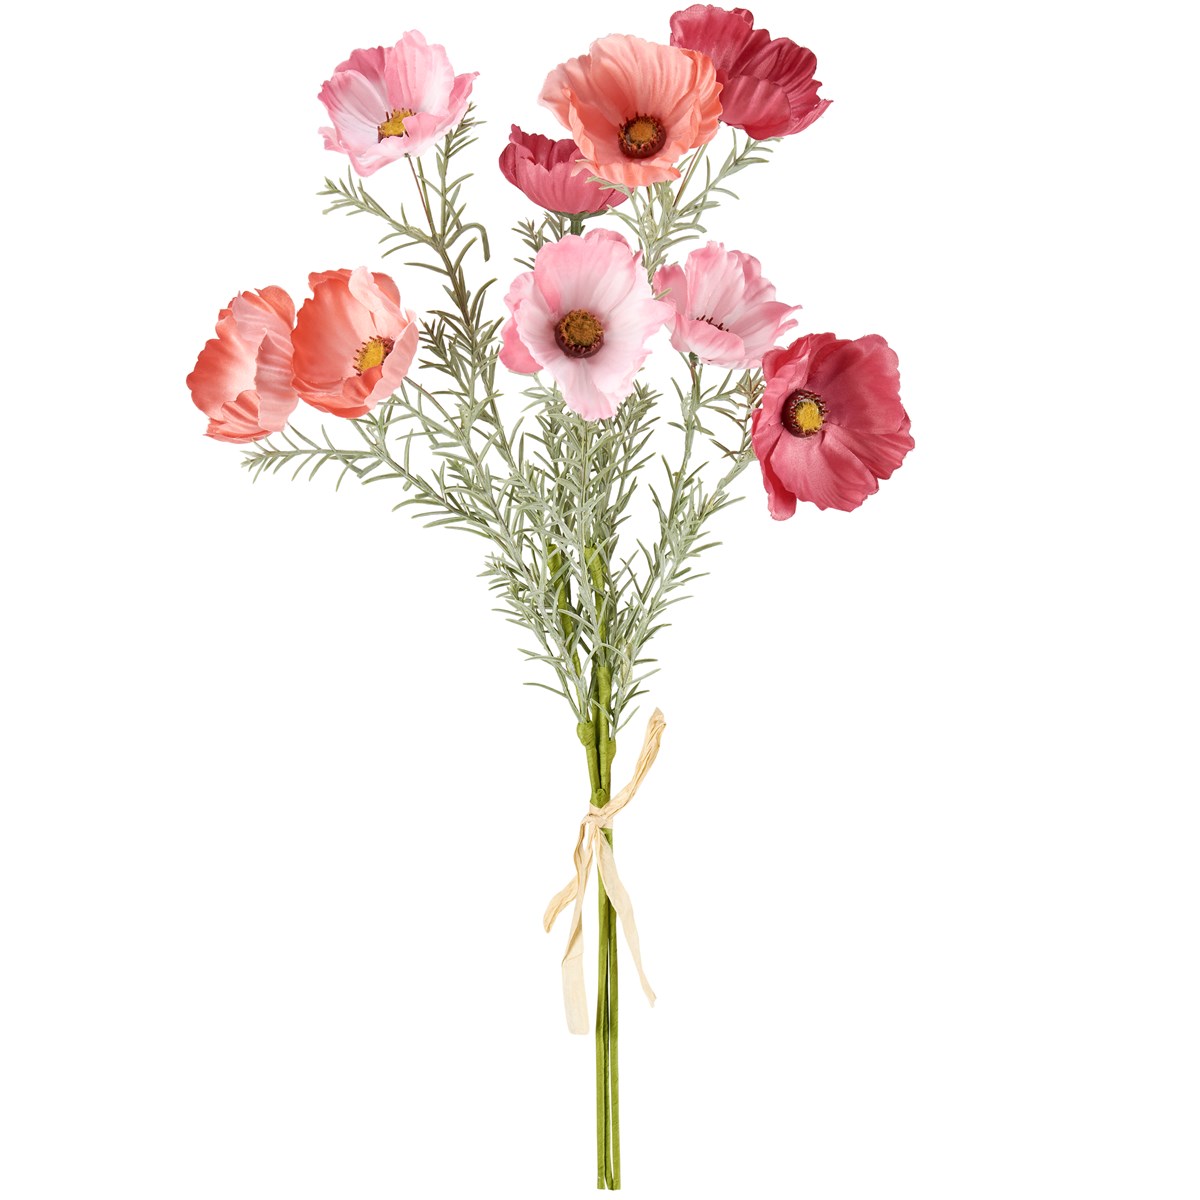 Peach Pink Cosmos Bouquet - Plastic, Fabric, Wire